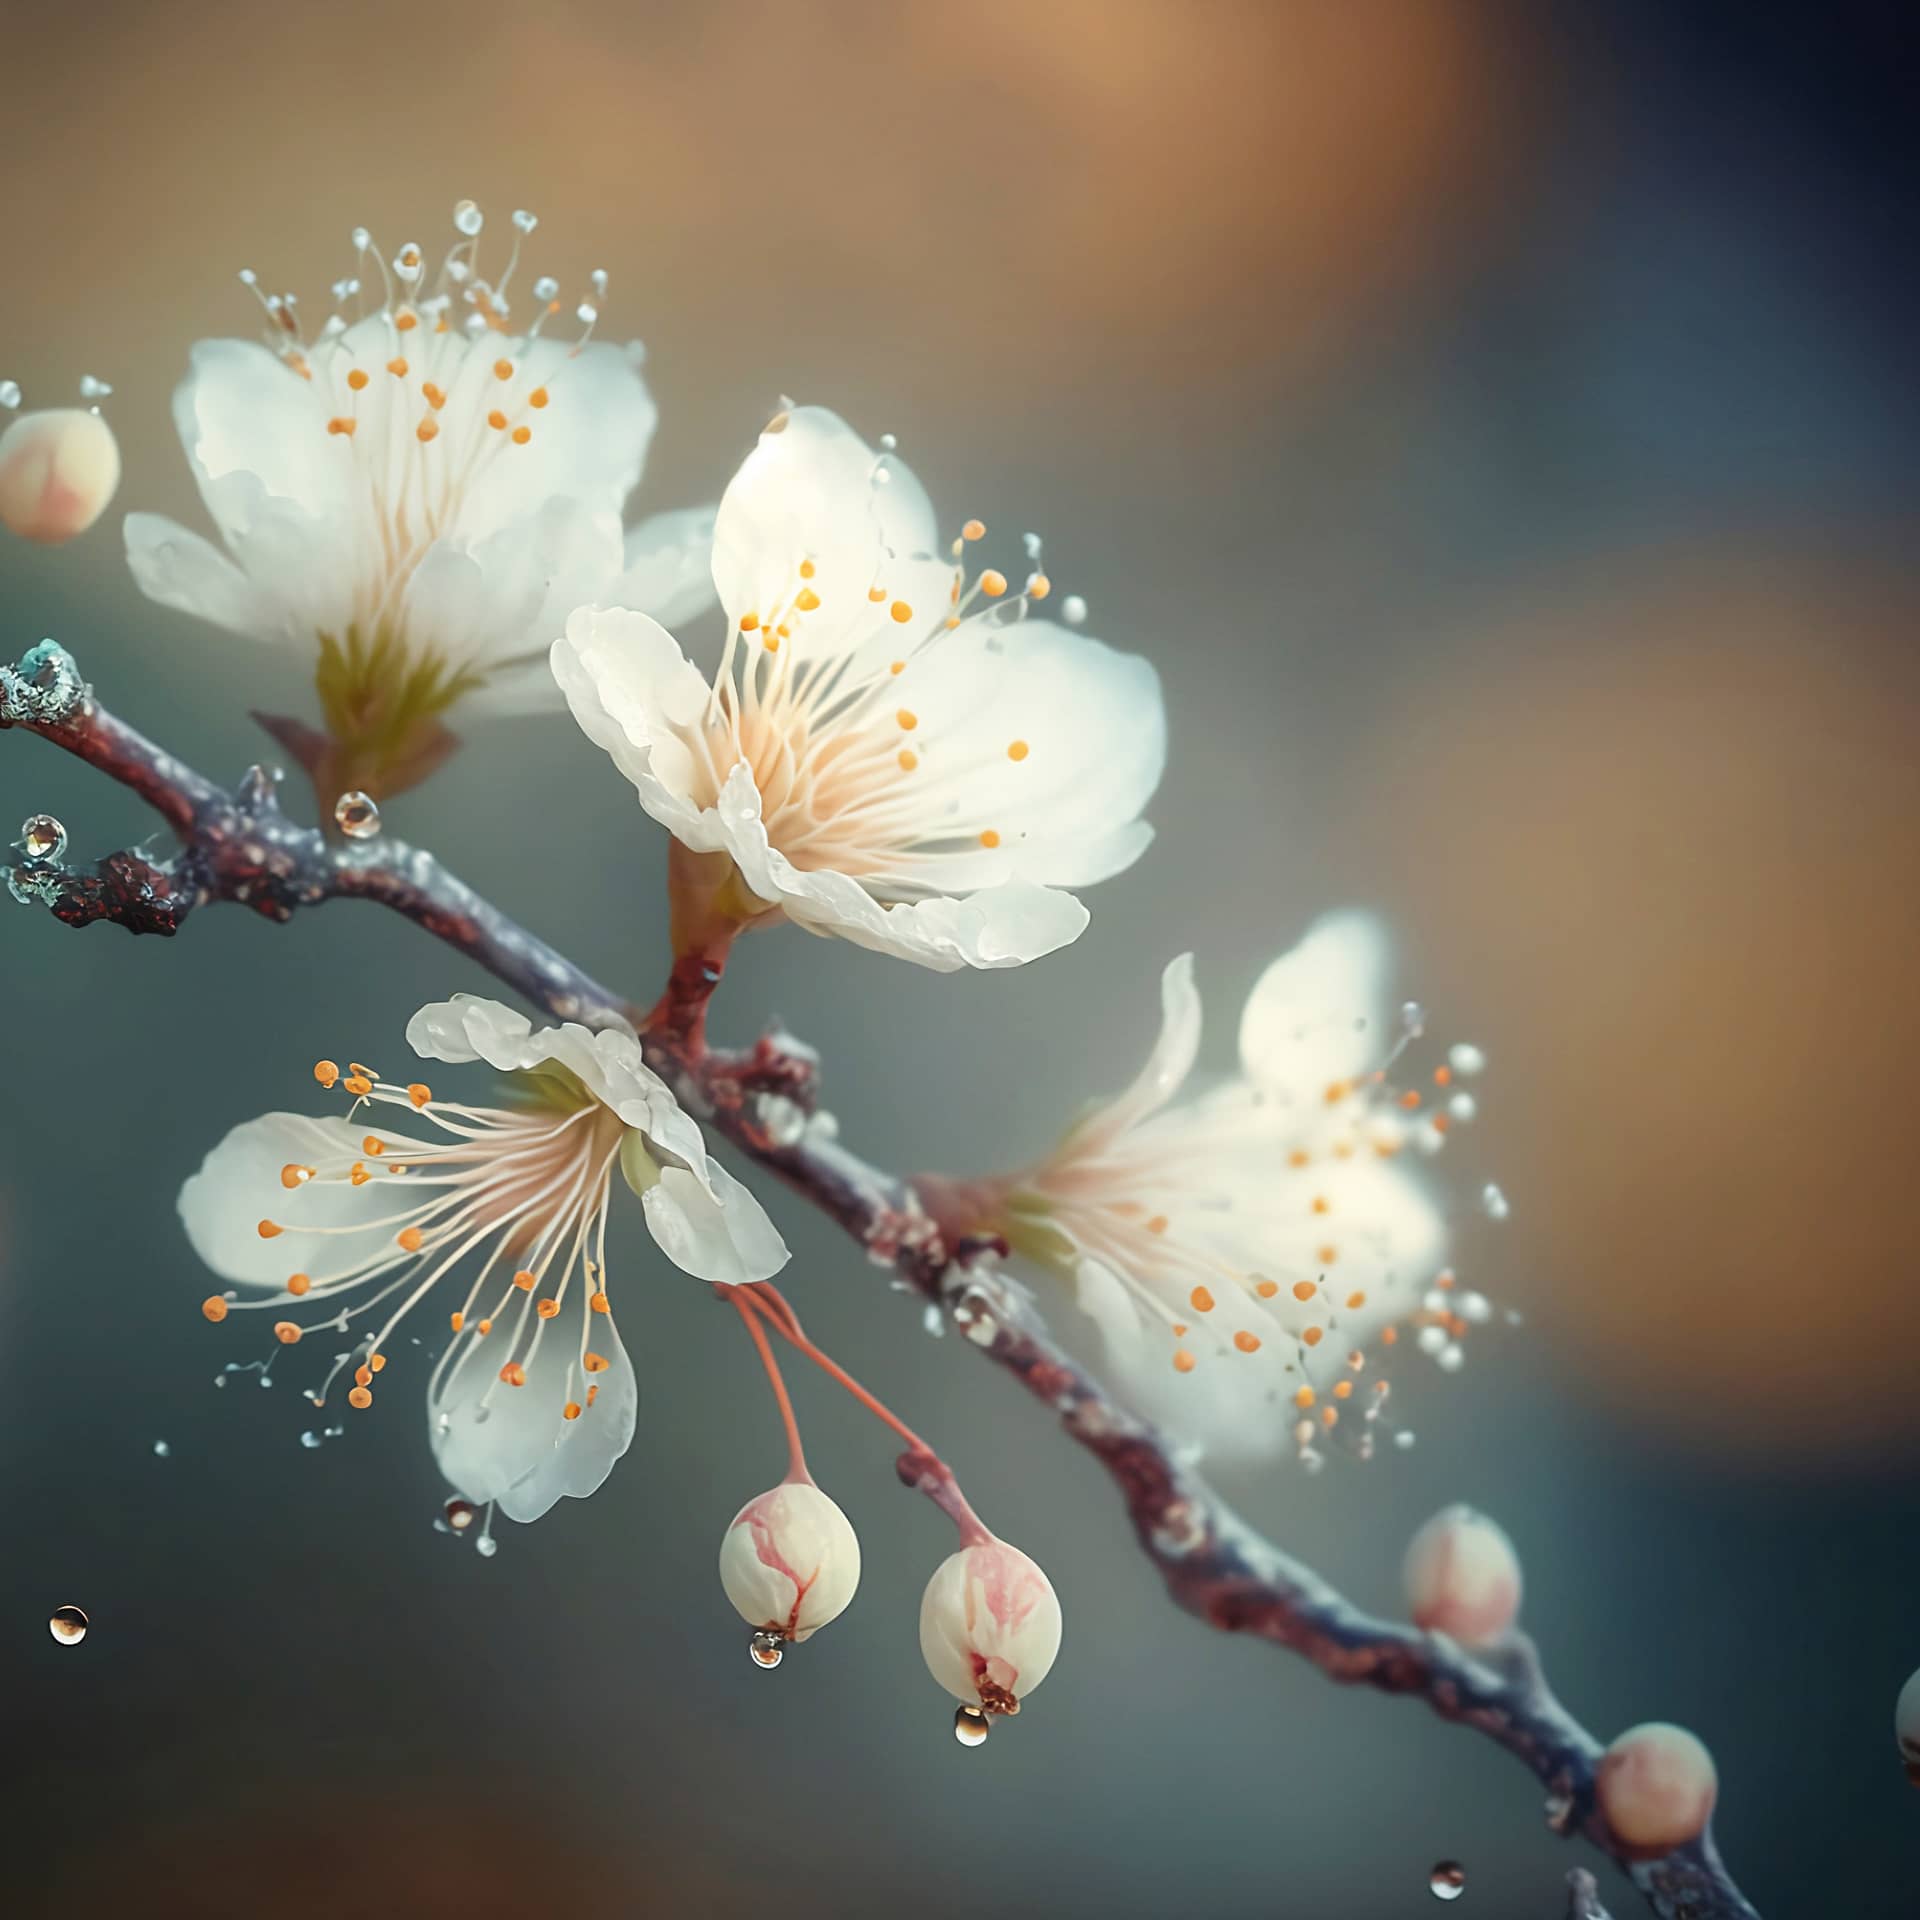 White cherry flowers with water drops close up flower profile picture